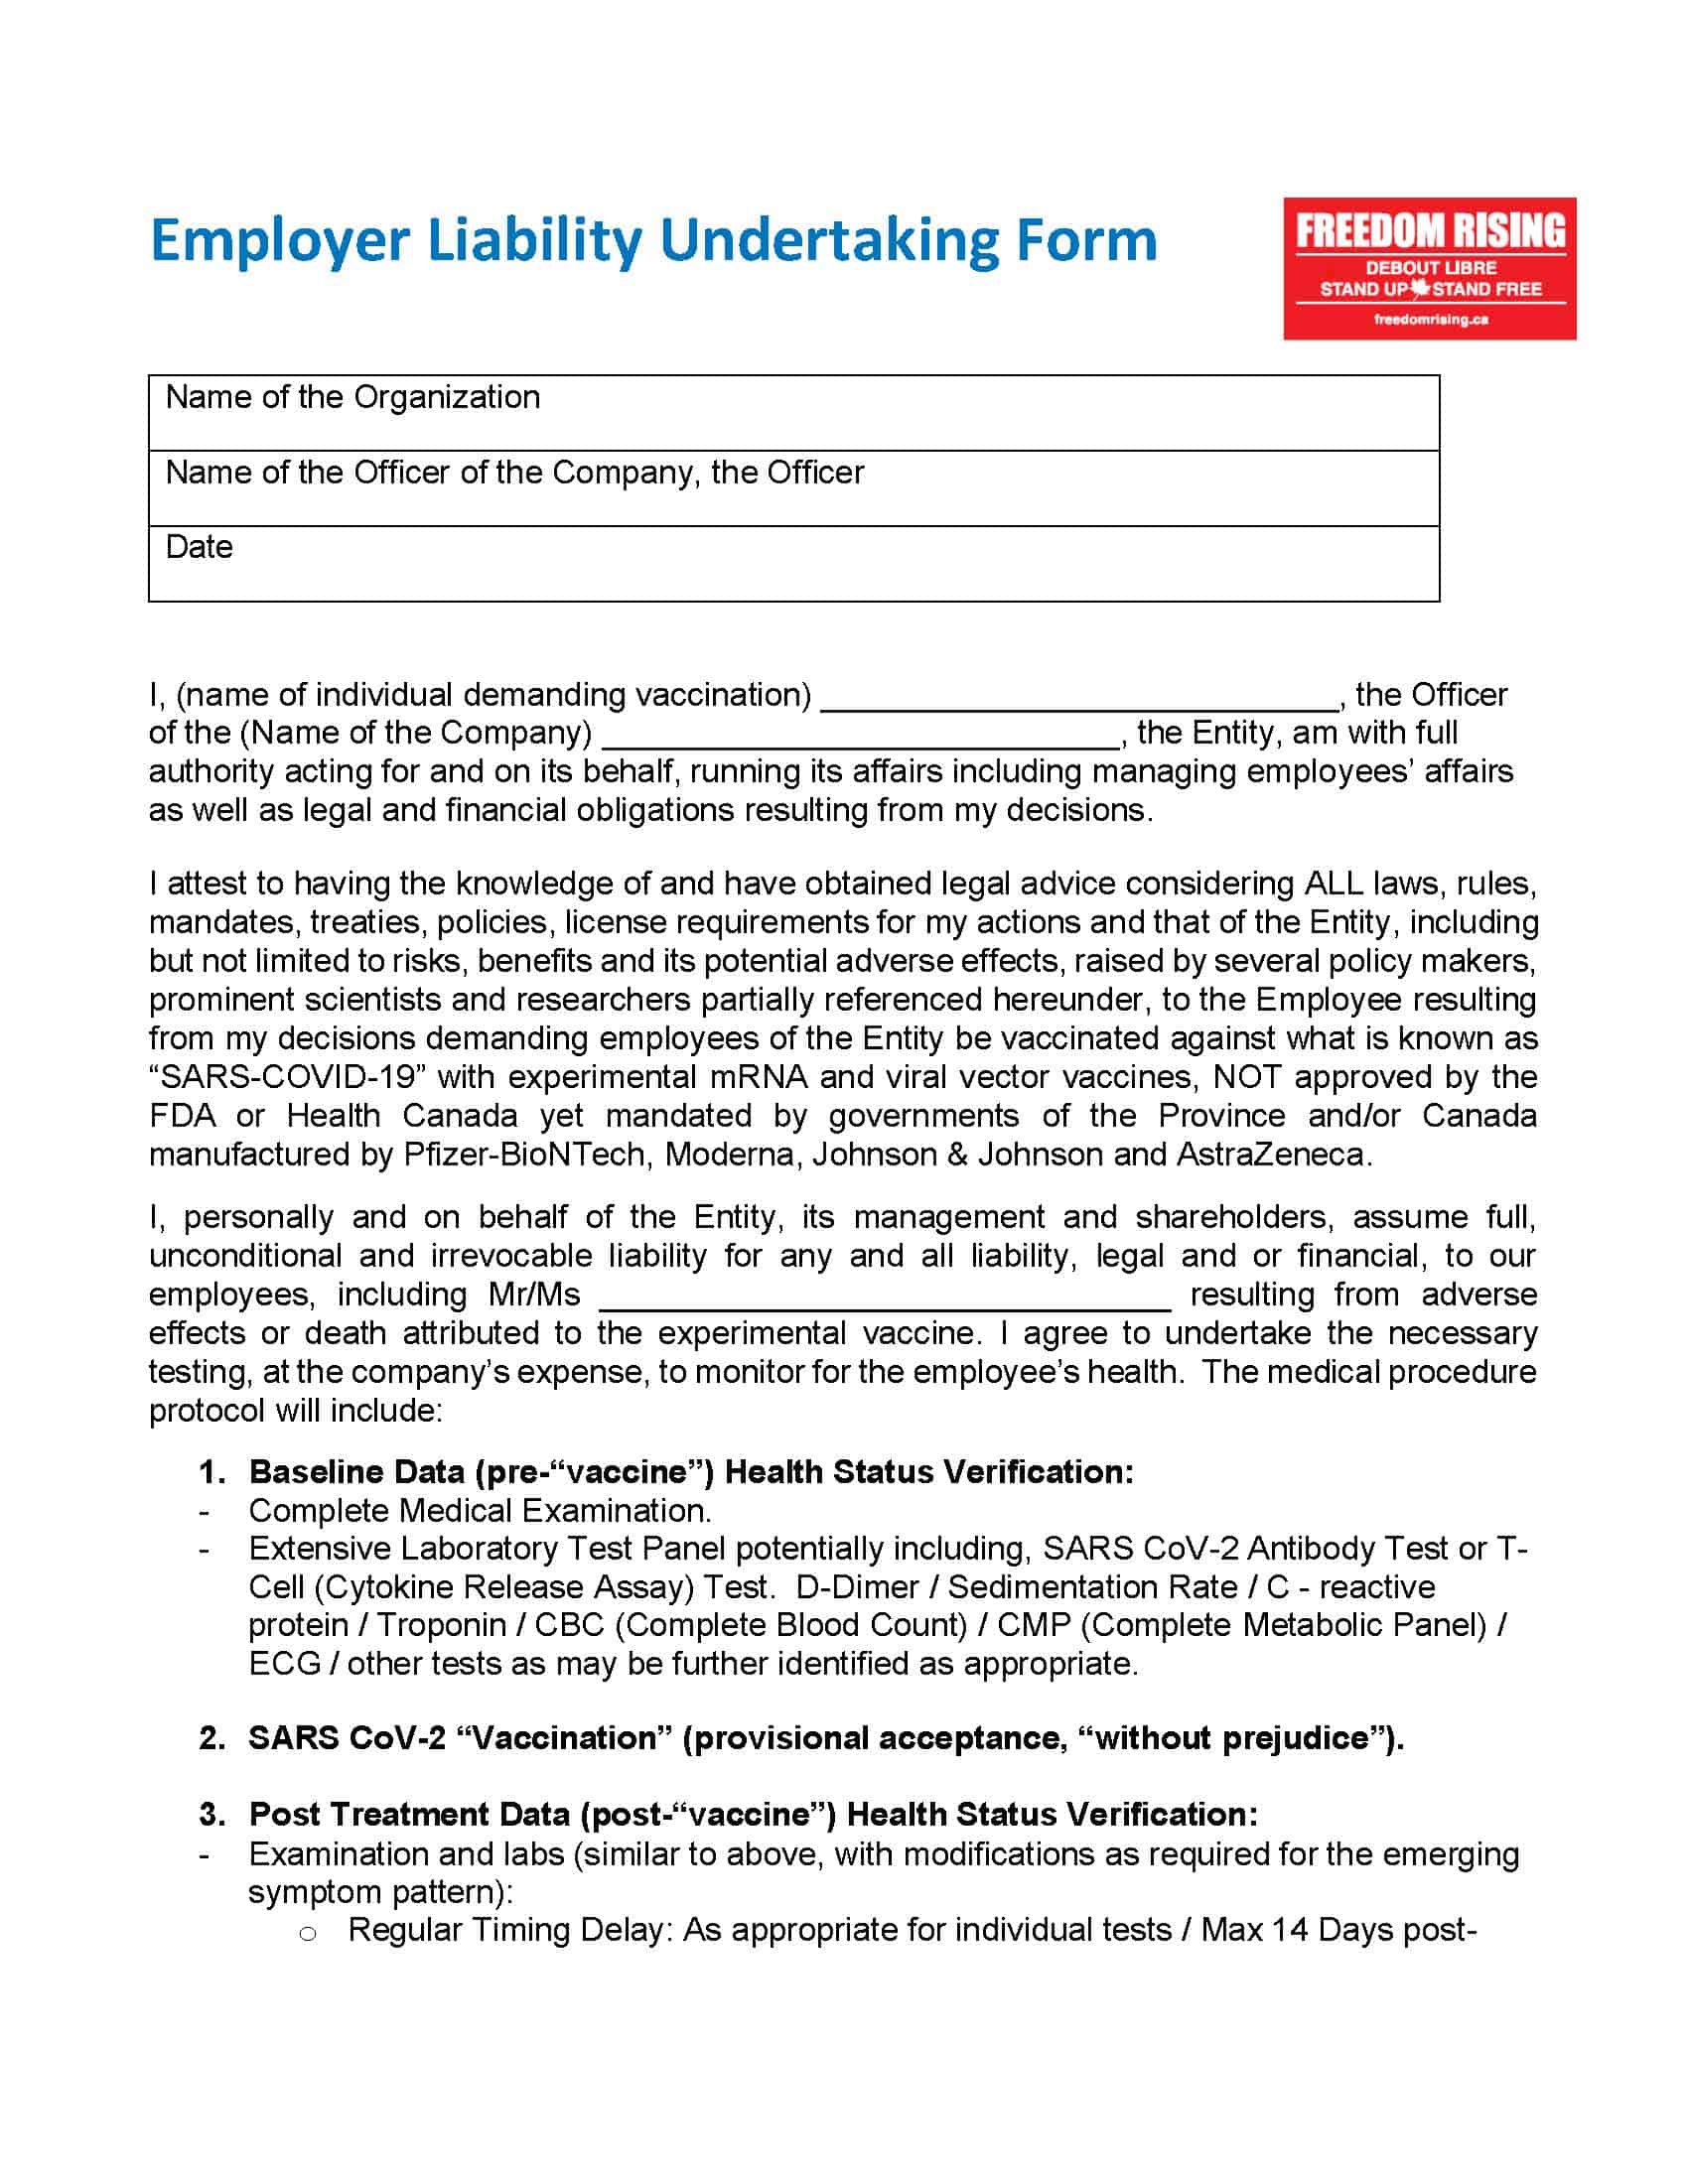 Employer Liability Undertaking Form_Page_1